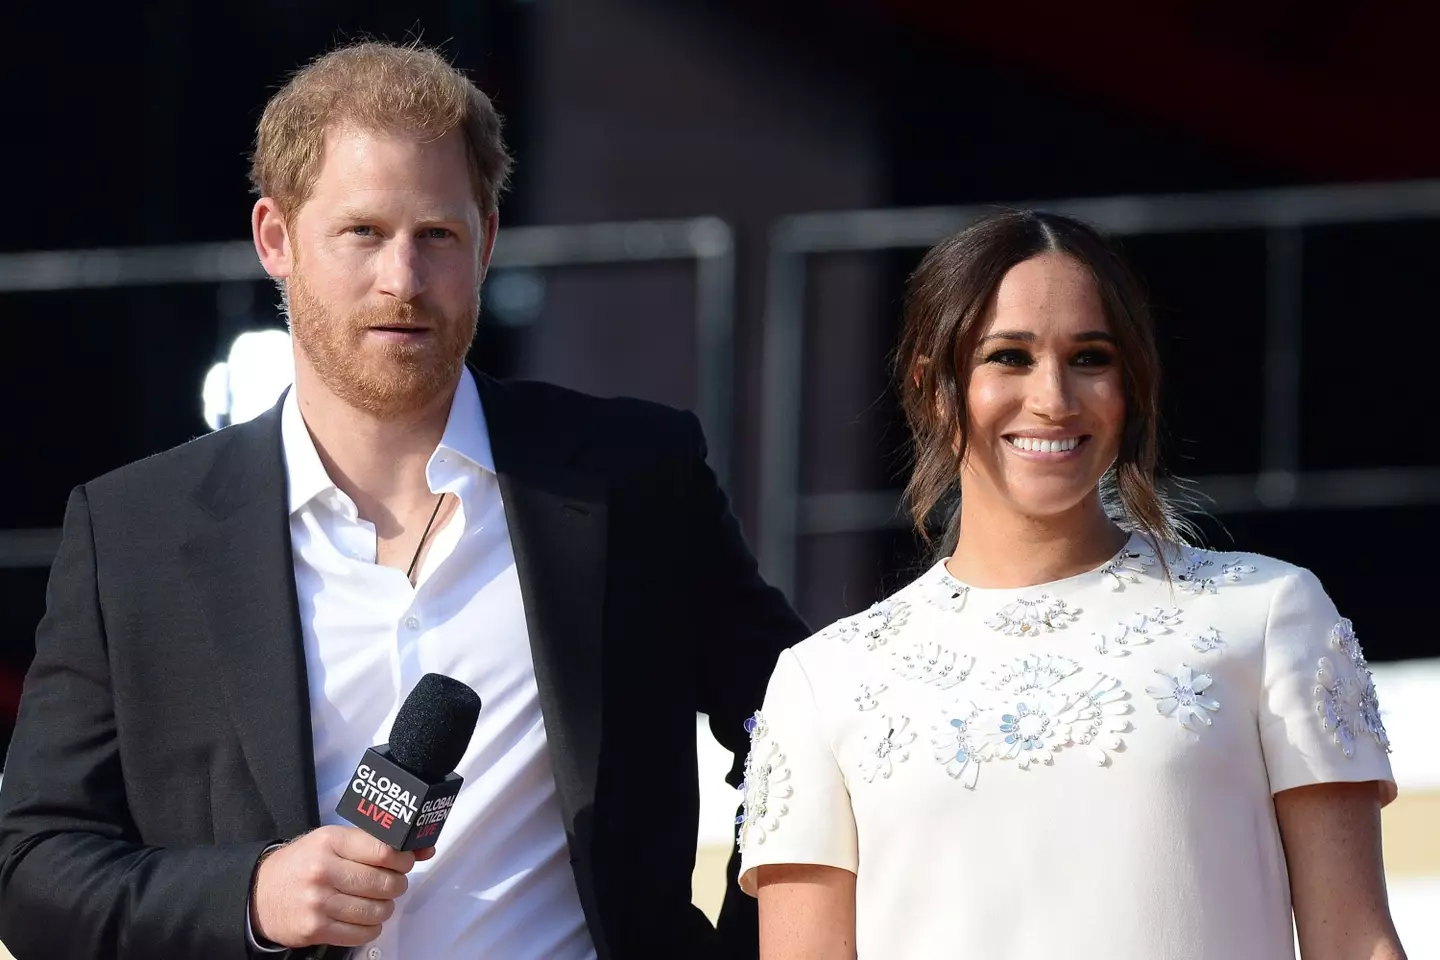 Prince Harry and Meghan Markle didn't accept the apology from the Sun.